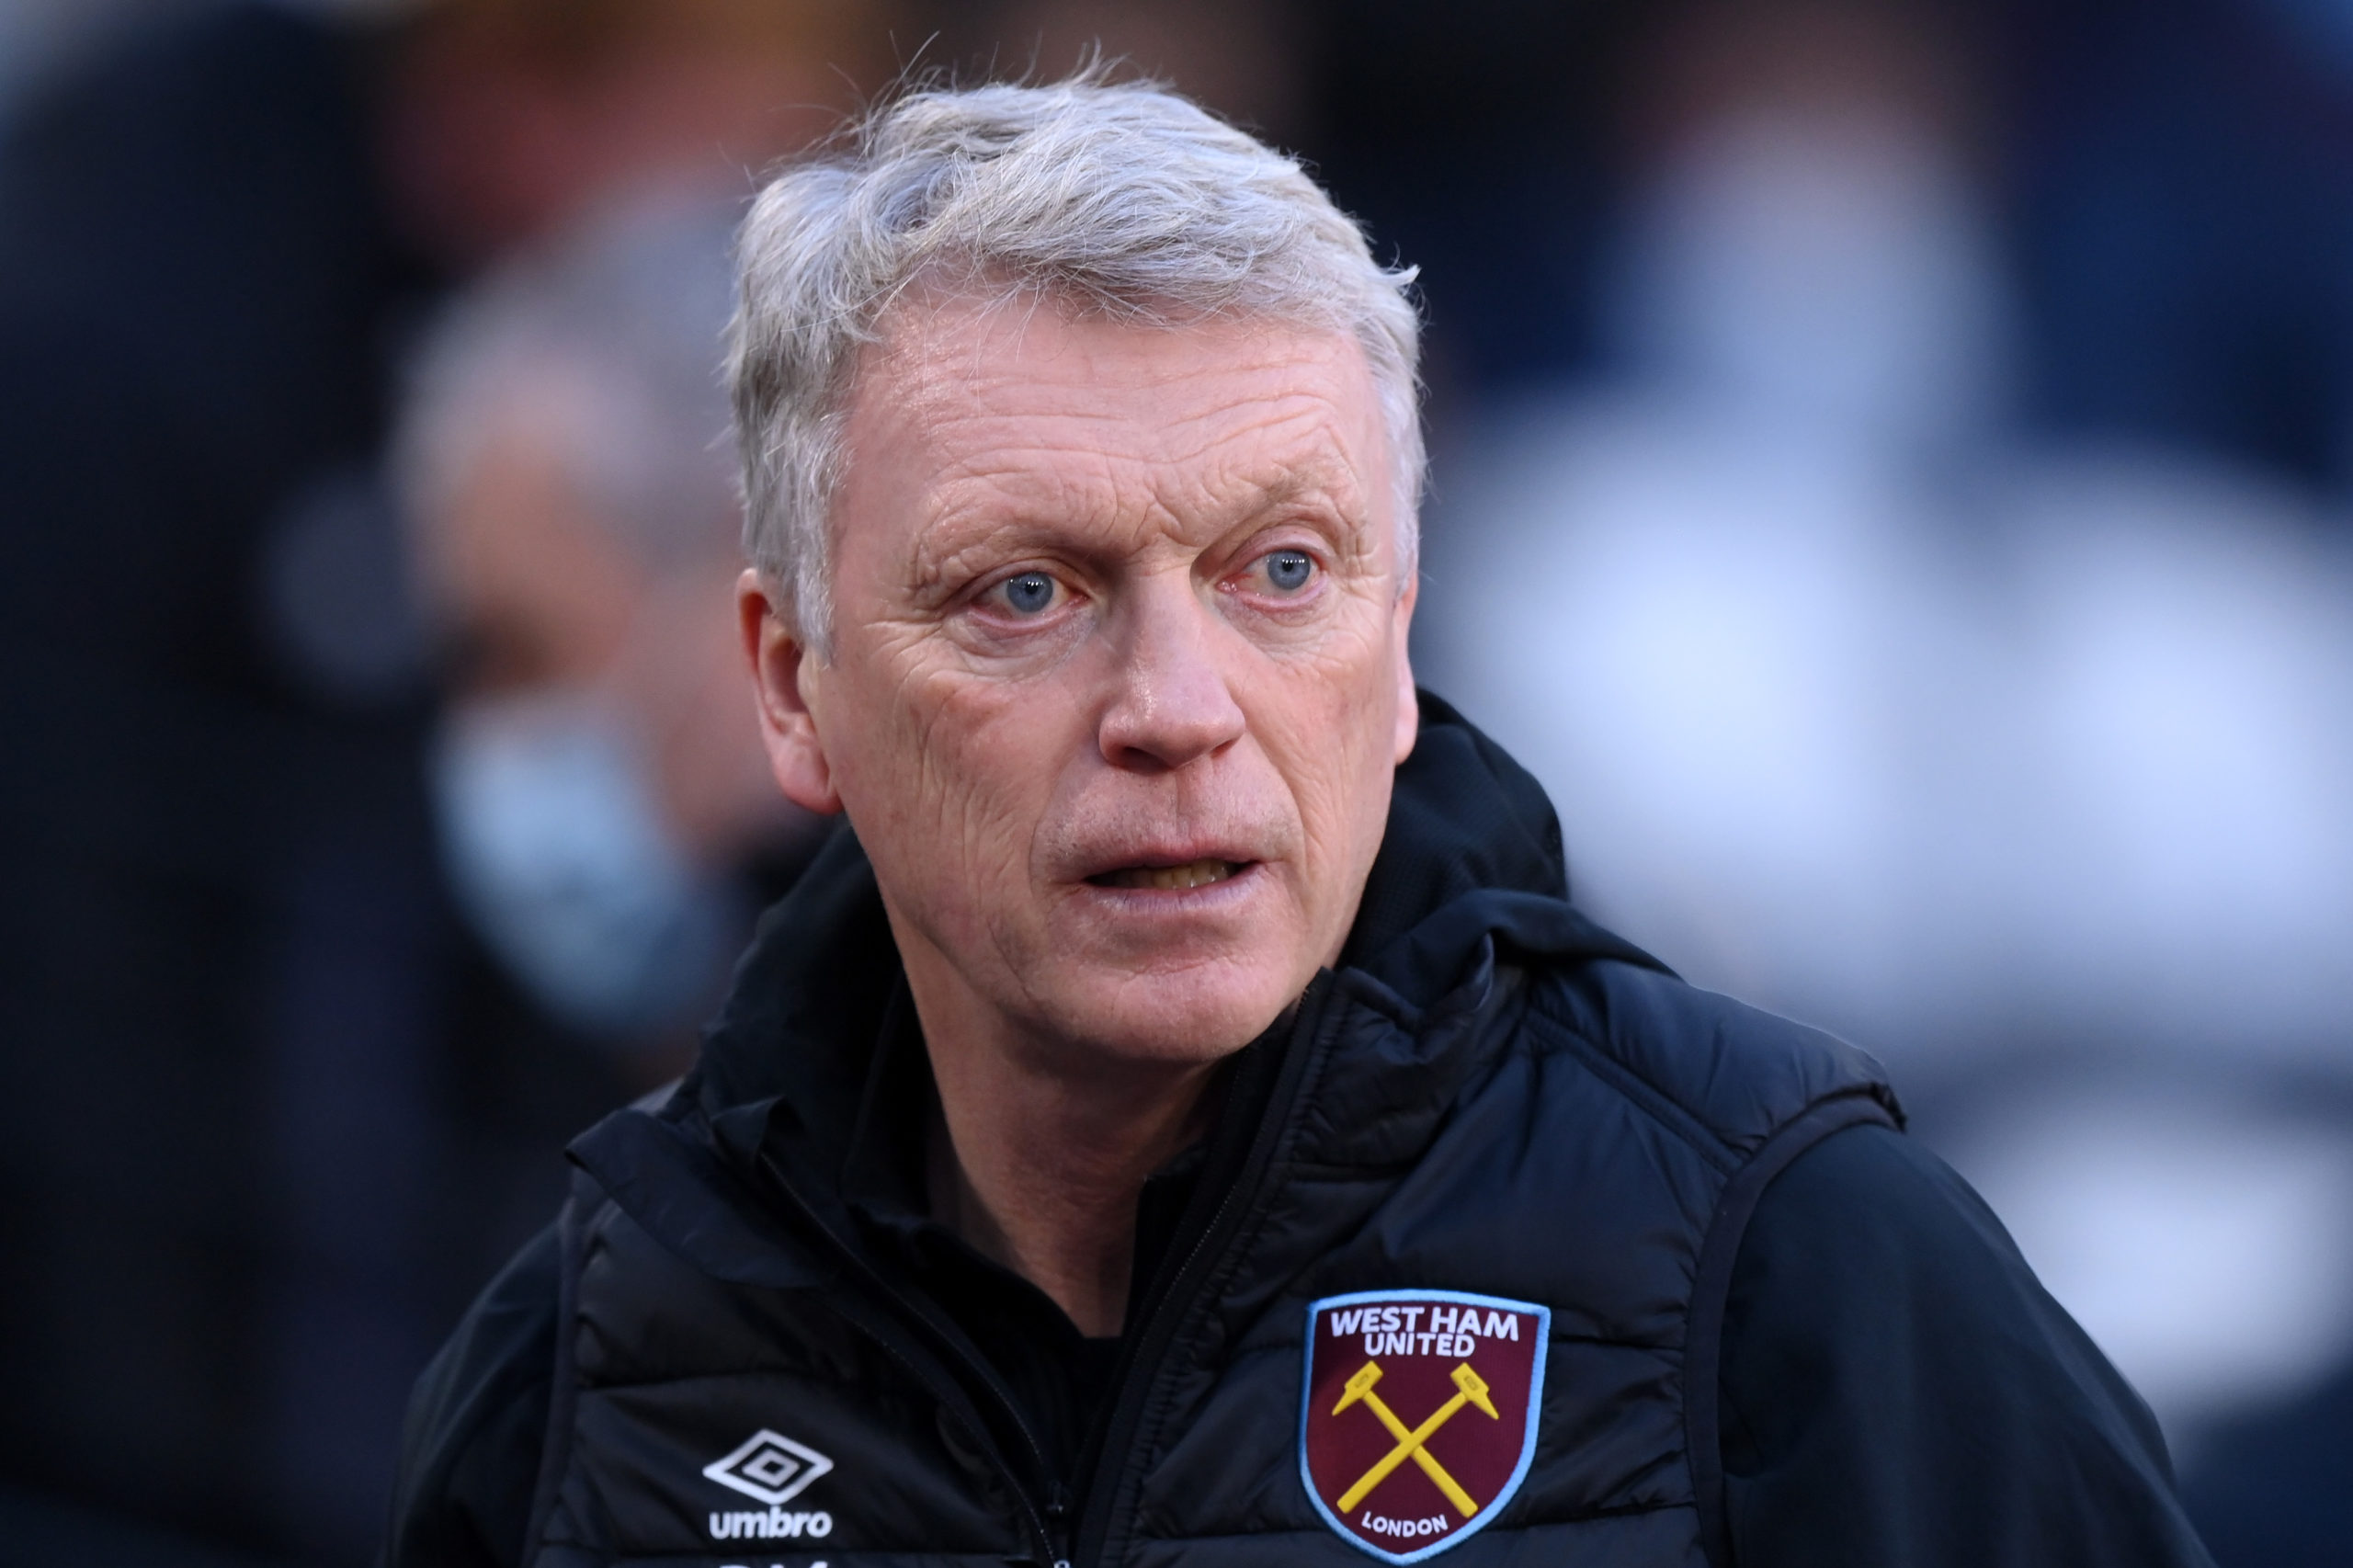 David Moyes admits he's concerned about West Ham duo Declan Rice and Tomas Soucek